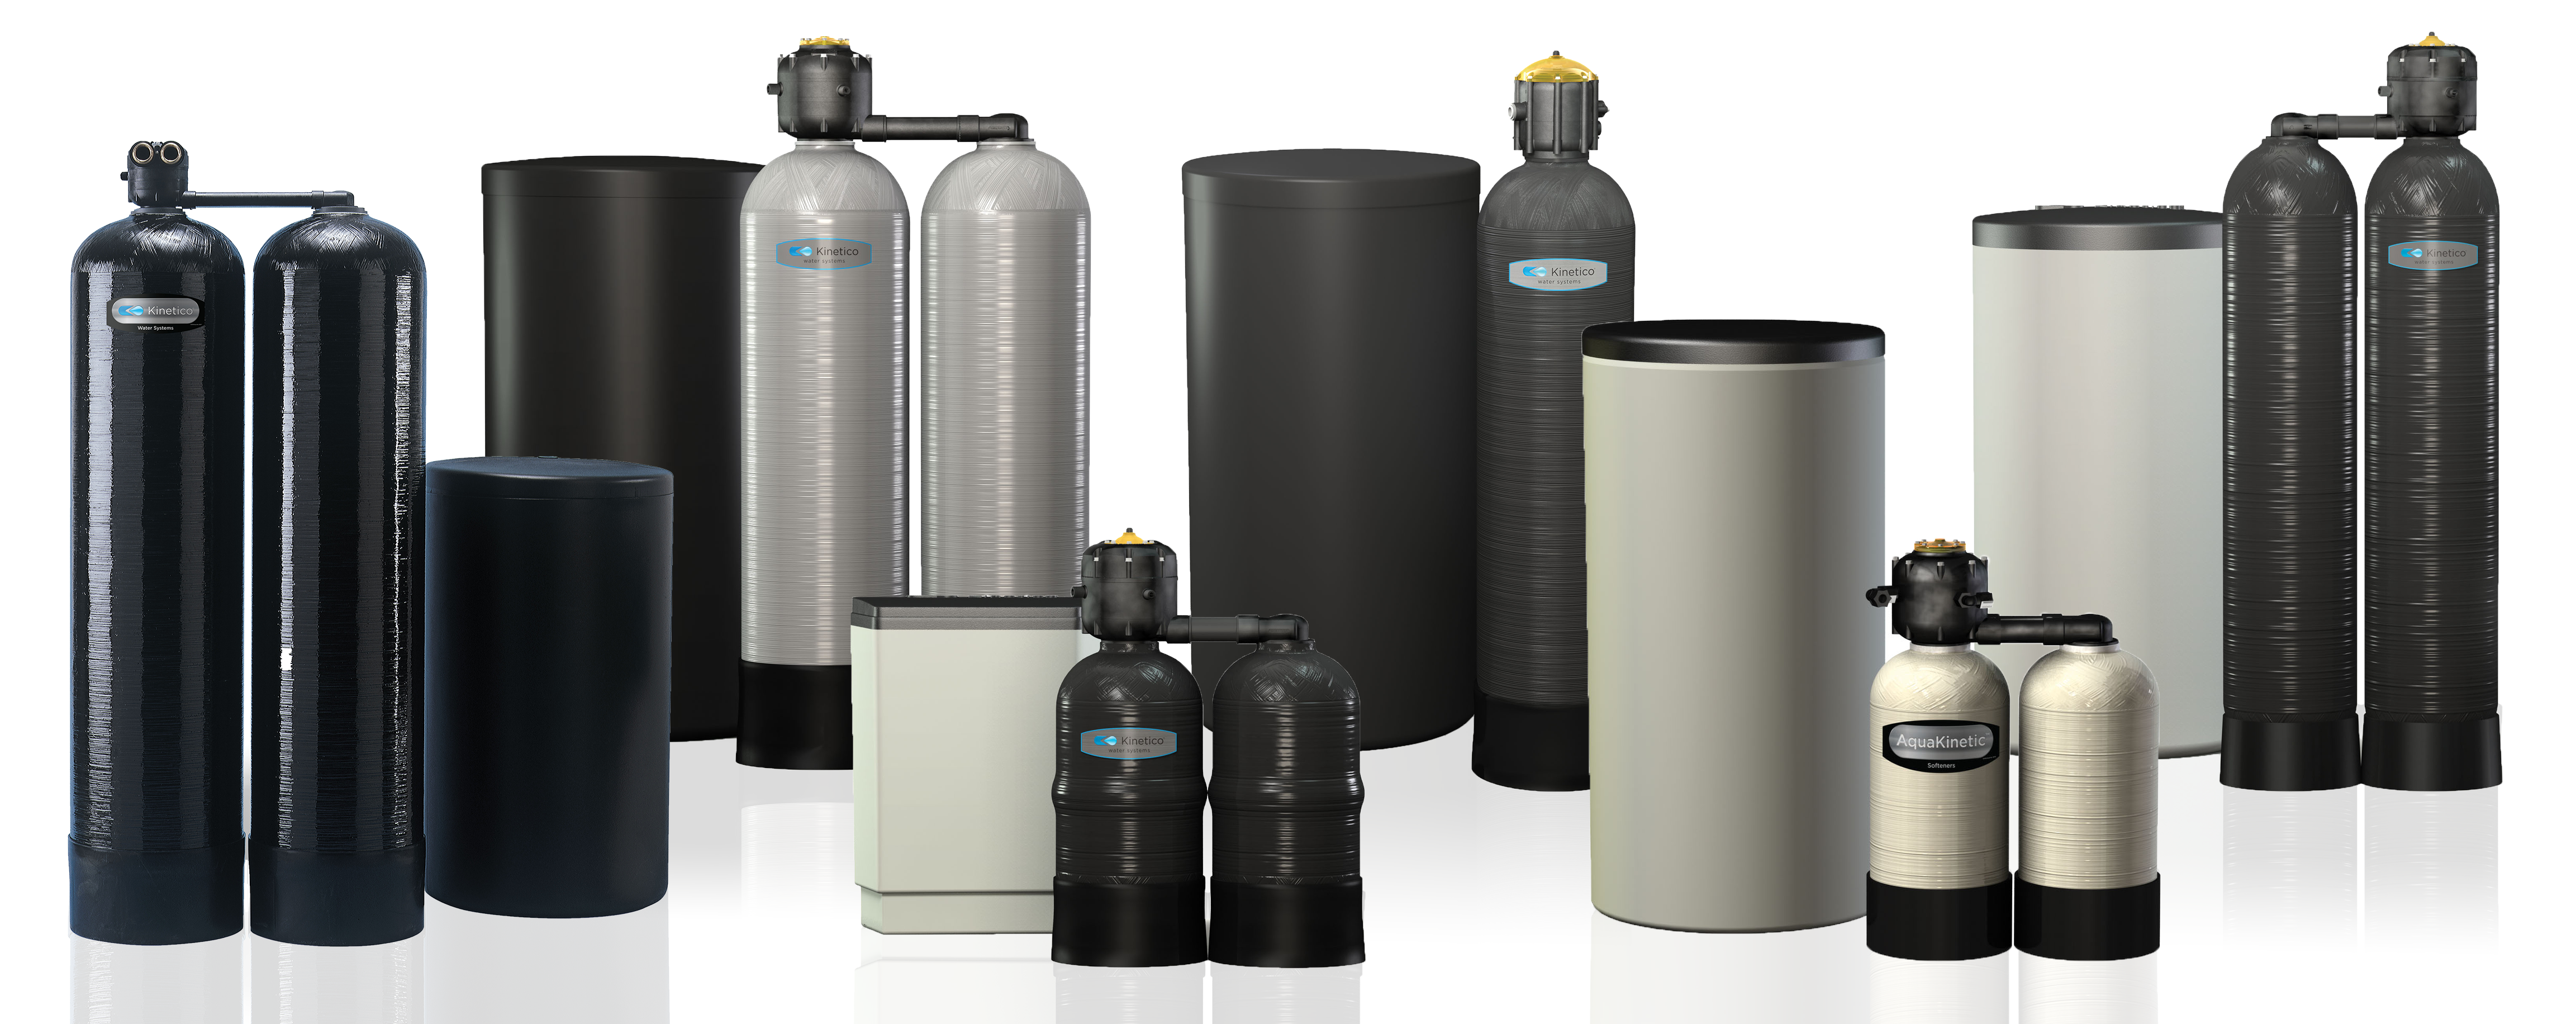 Water Softener Family of Products